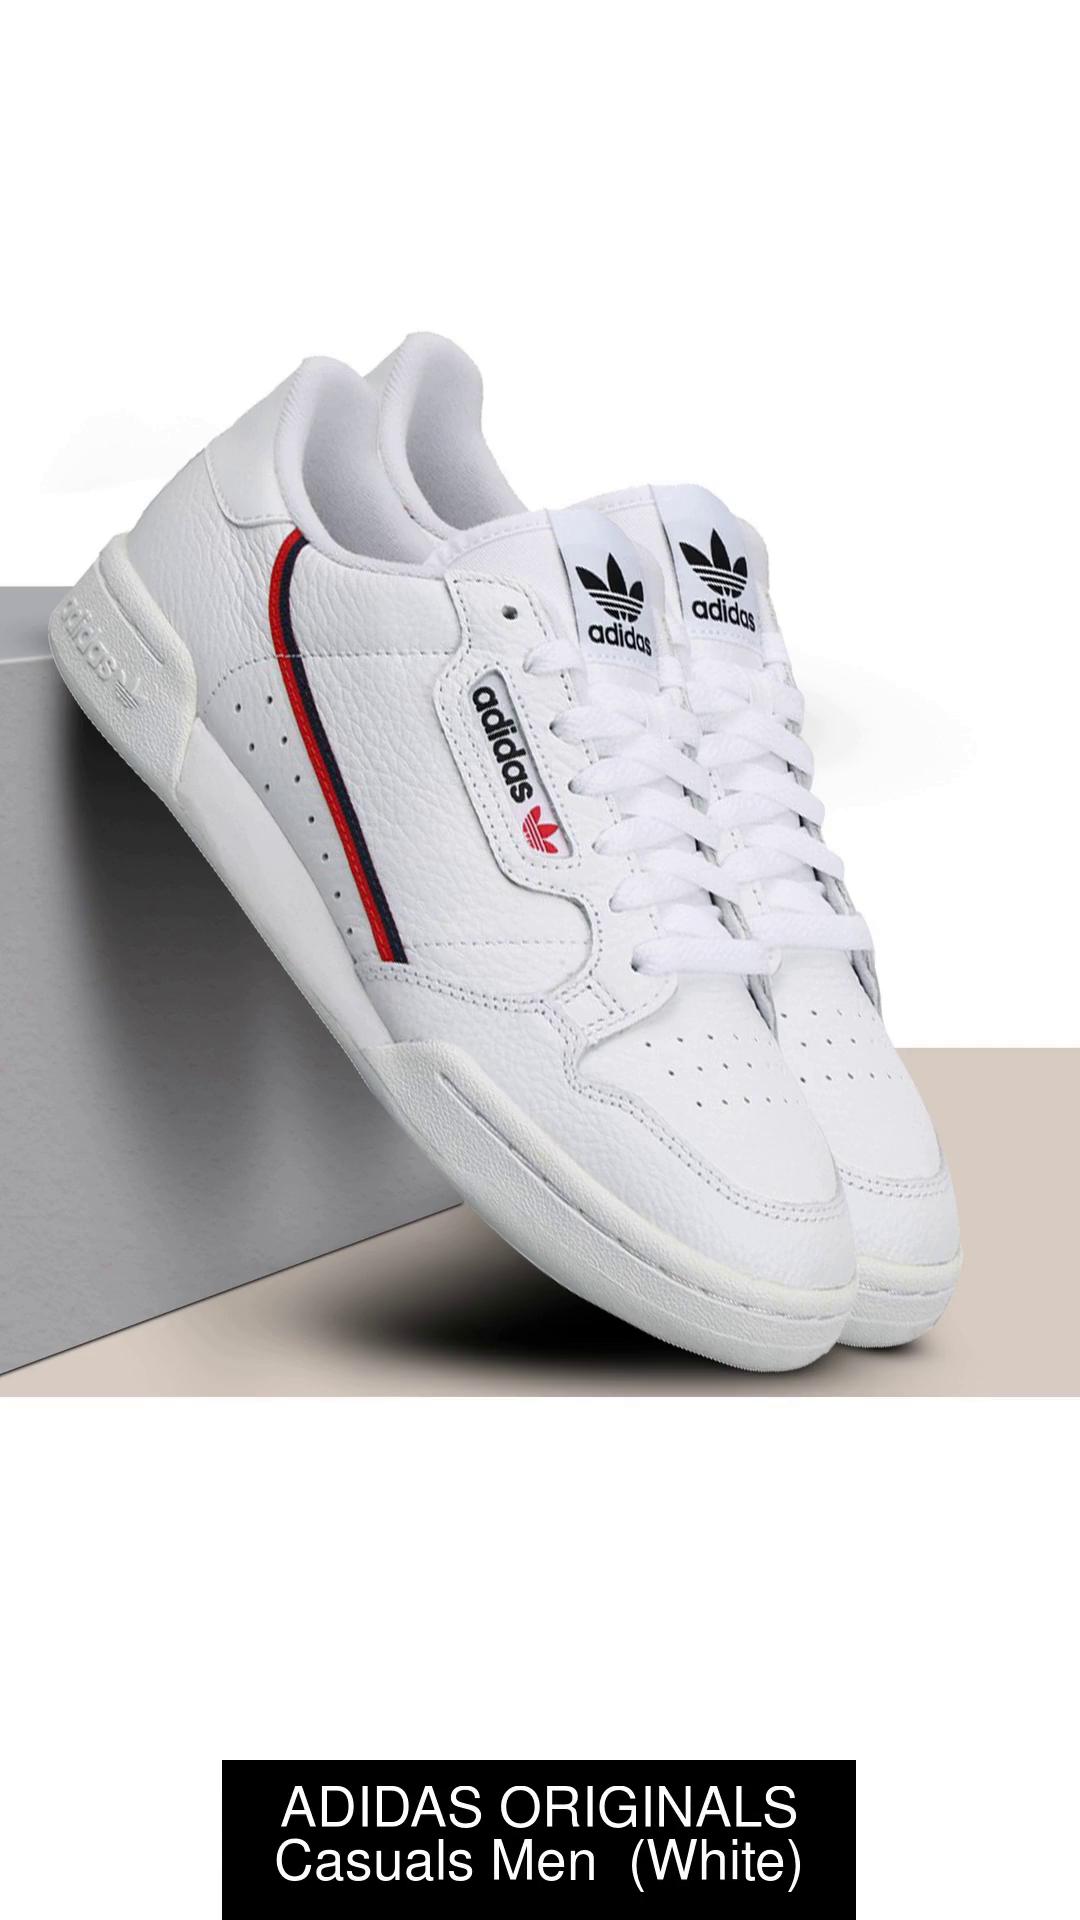 Buy 80 Online For at Best India For for Online 80 ADIDAS in - Men Men ADIDAS Sneakers ORIGINALS Price Sneakers Continental - ORIGINALS Shop Continental Footwears